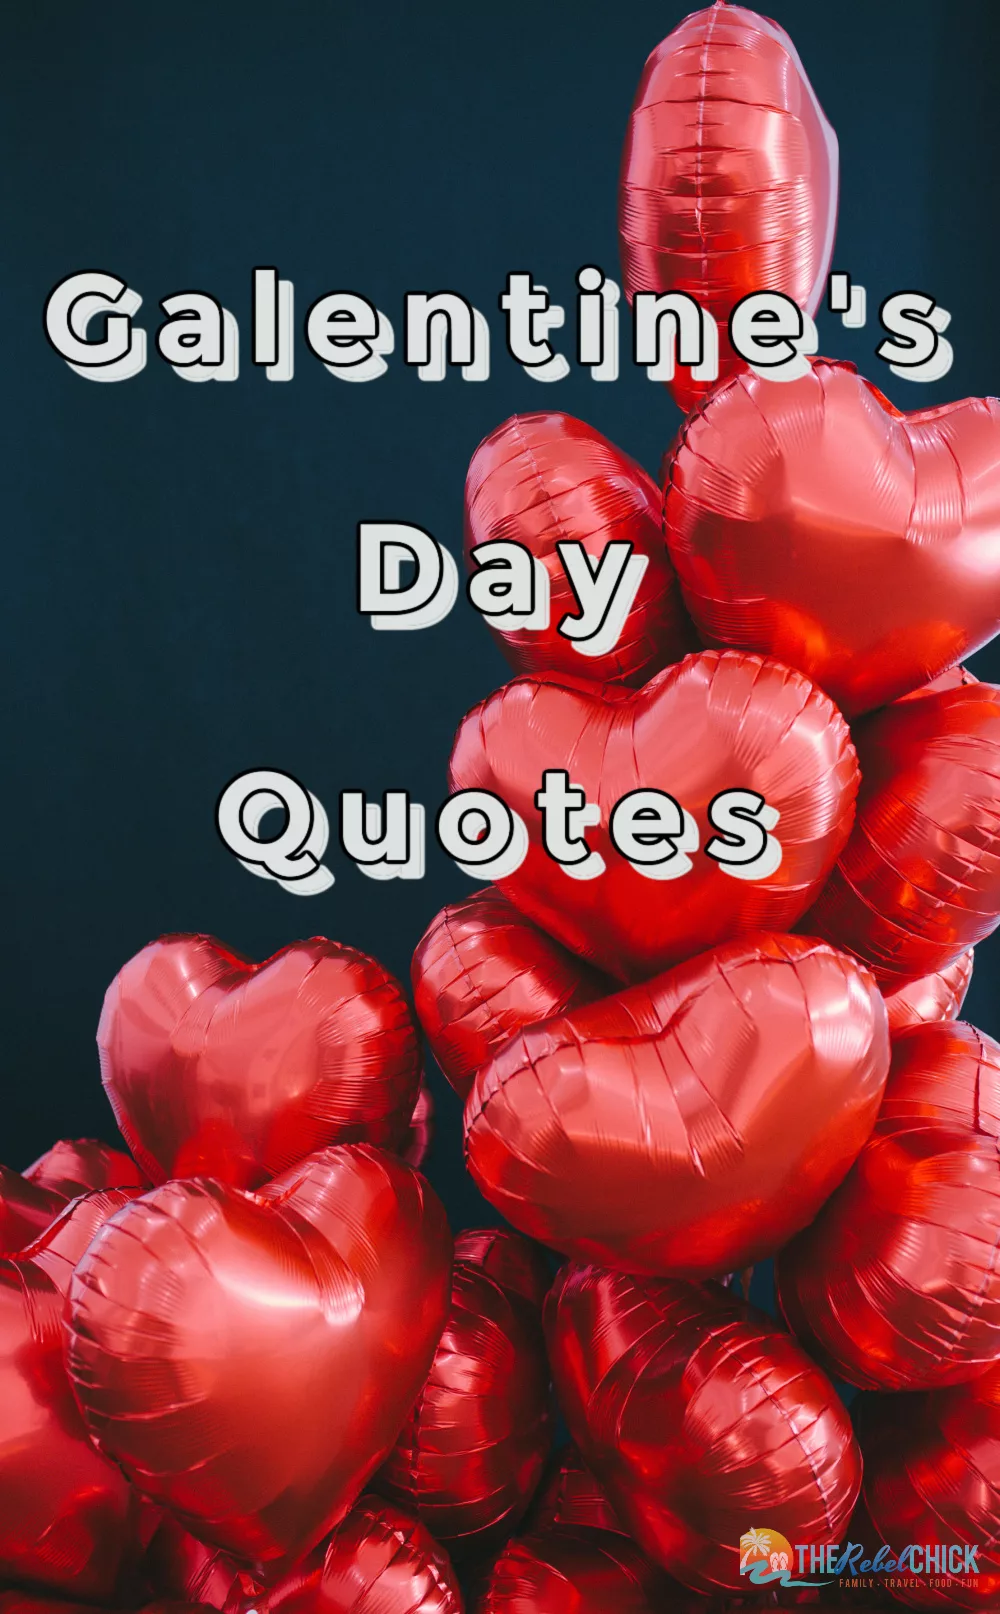 Valentines Galentines Day Quotes with Red Mylar Baloons